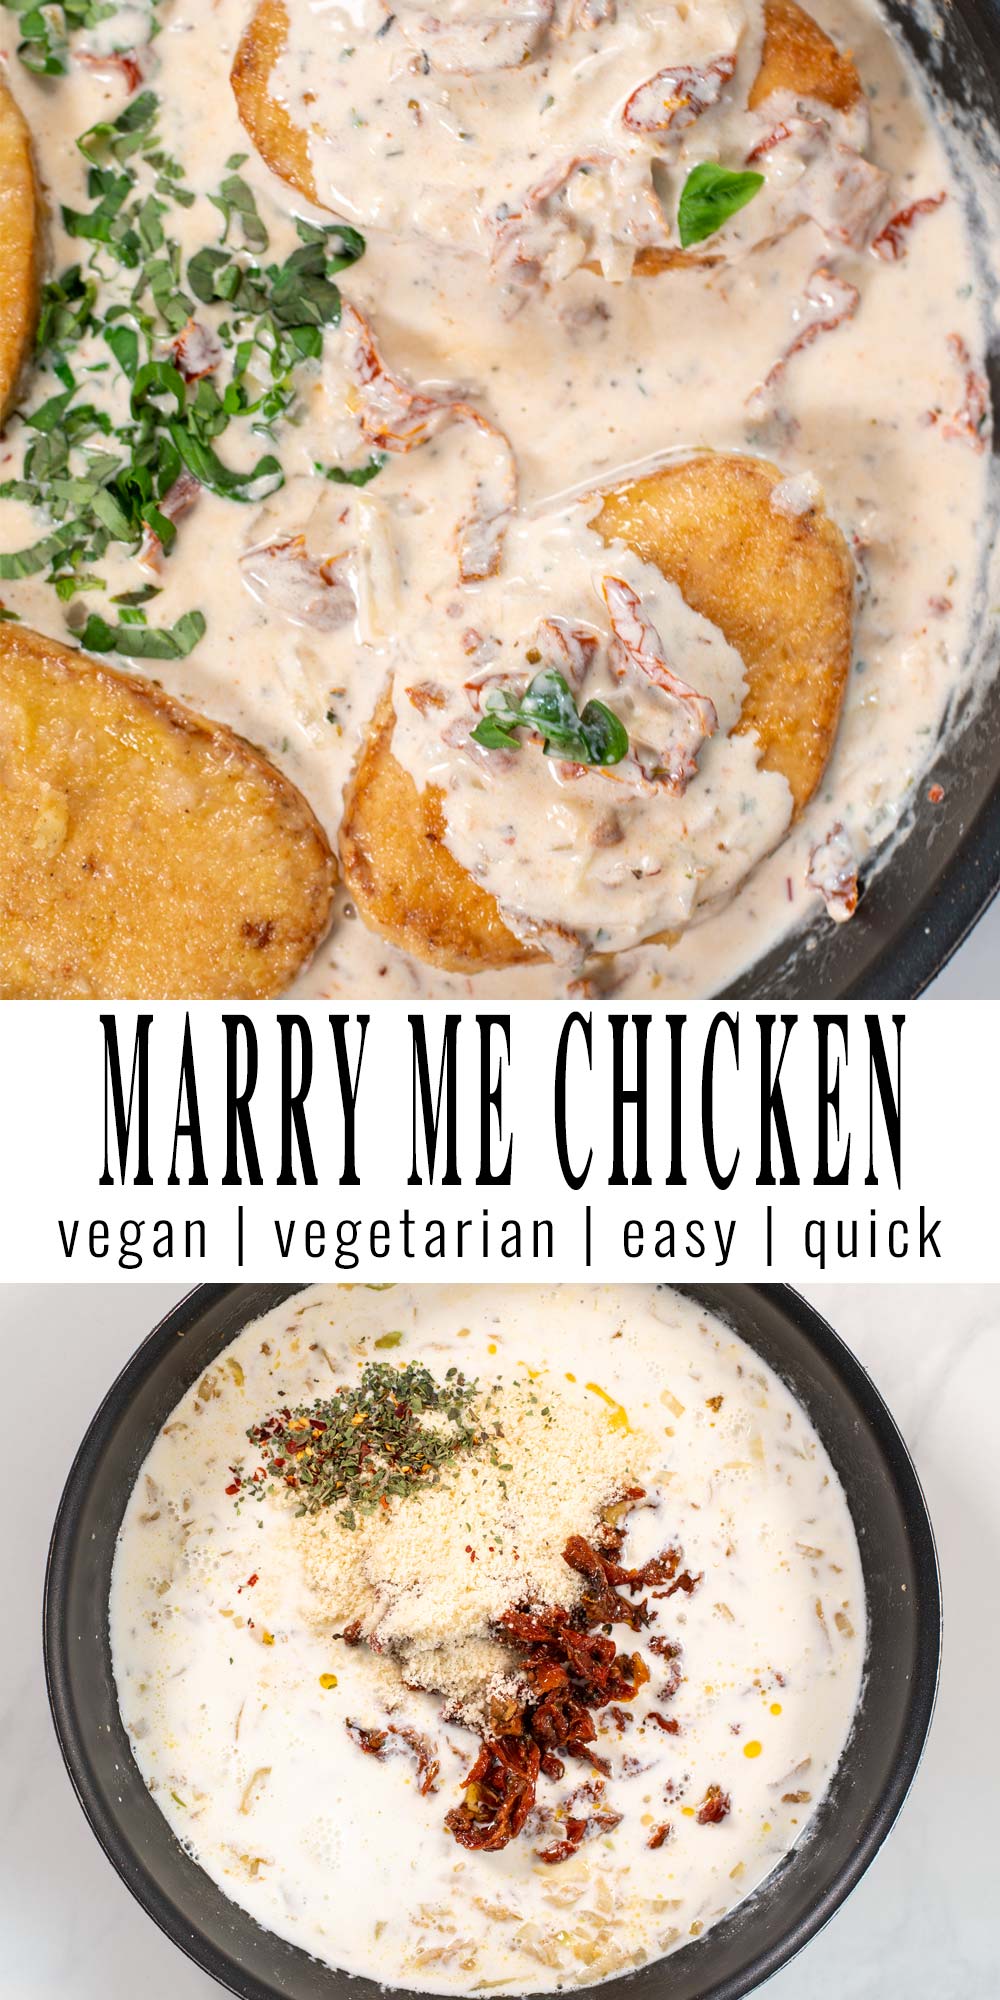 Collage of two photos showing Marry Me Chicken with recipe title text.